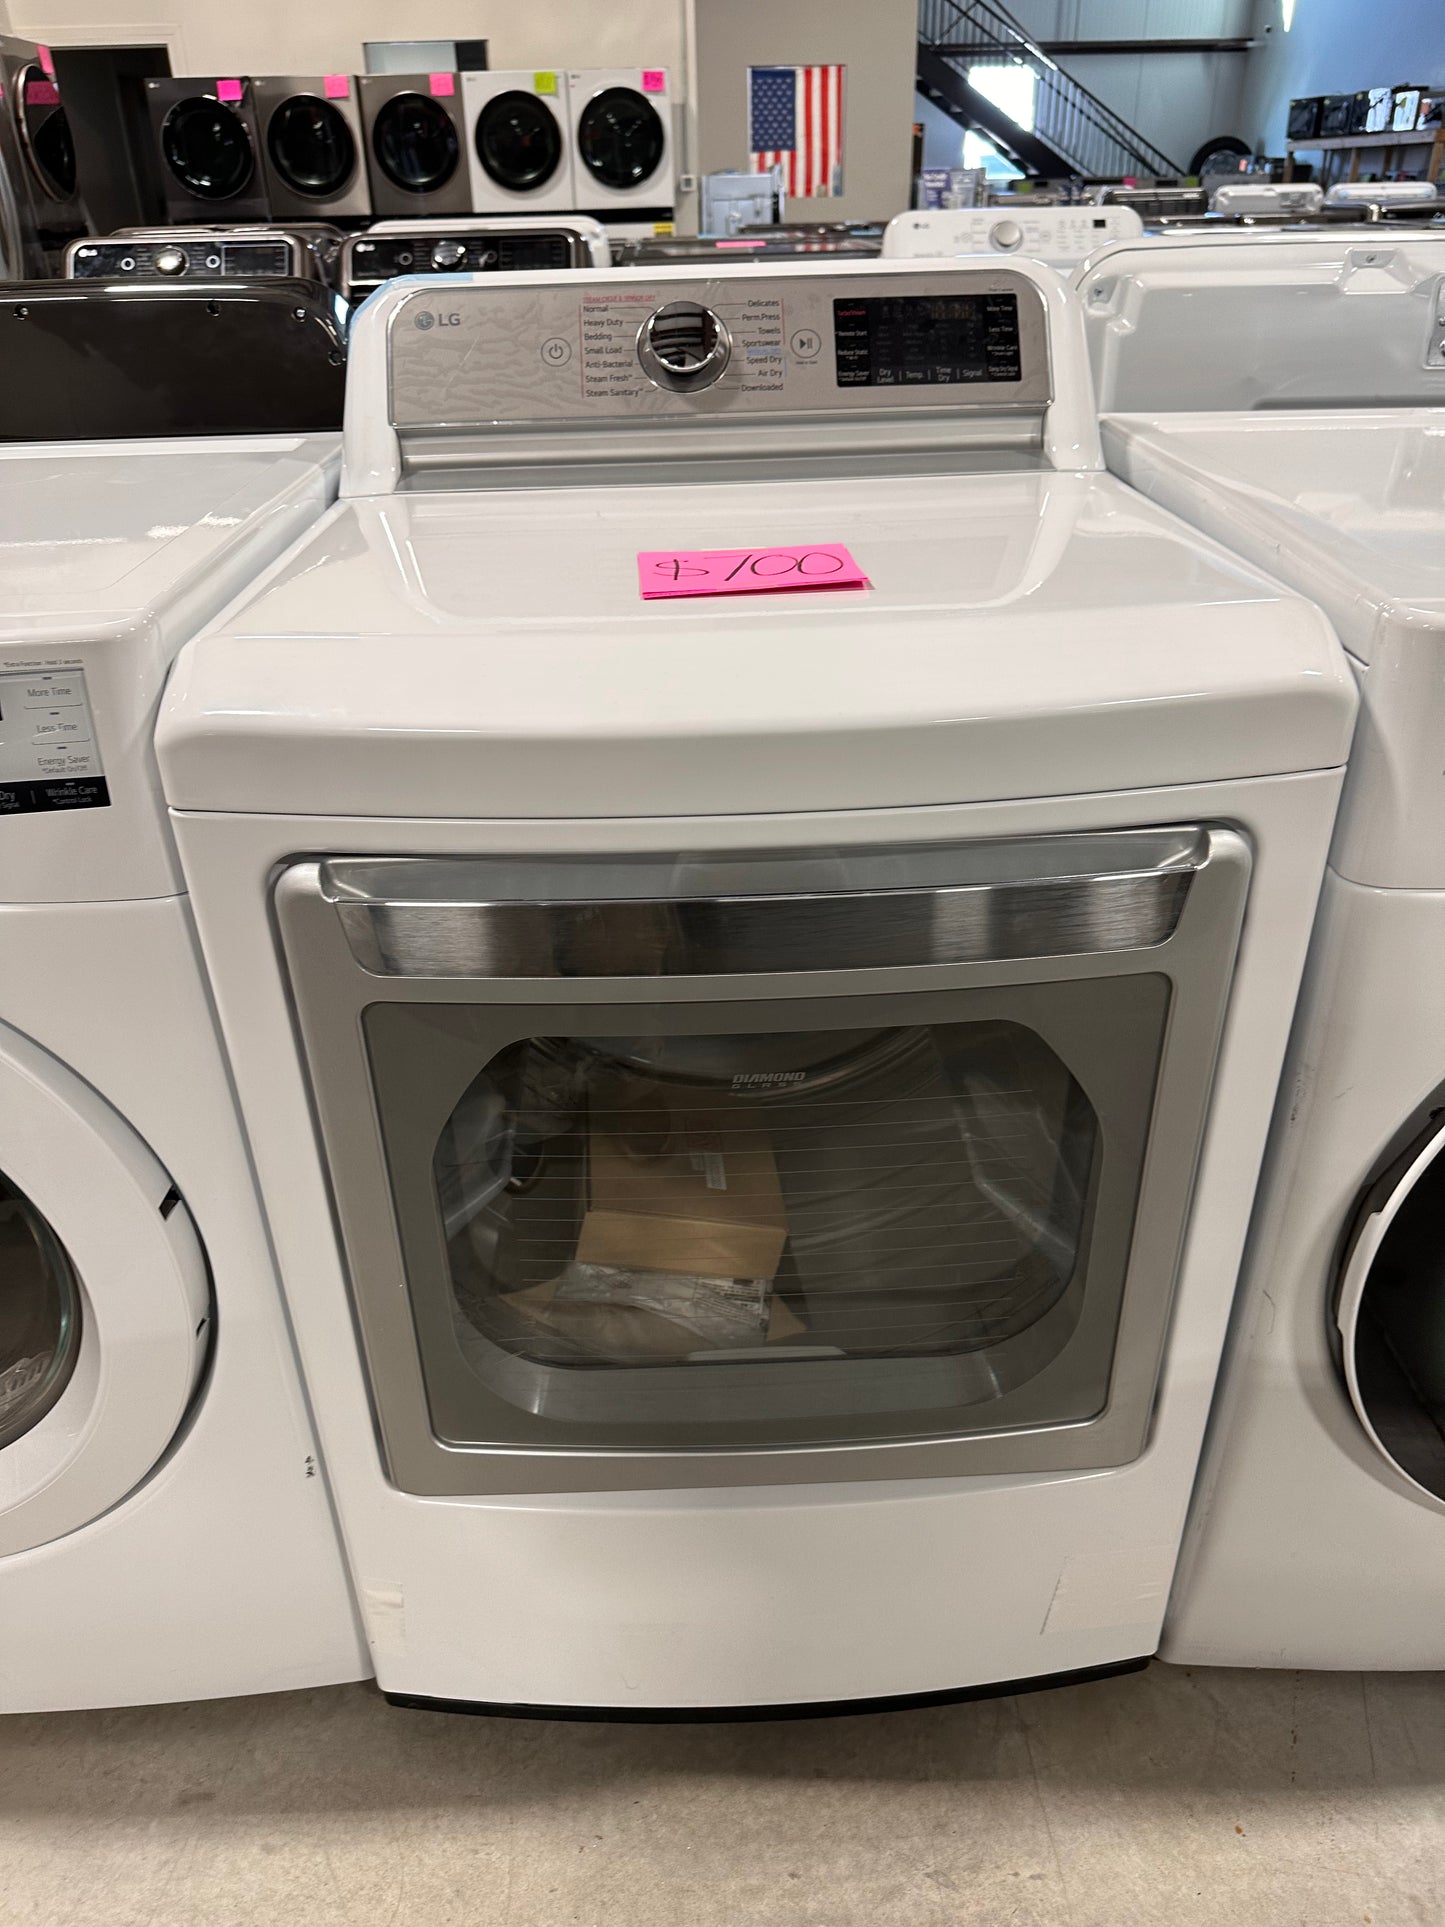 GORGEOUS NEW 7.3 CU FT SMART ELECTRIC DRYER - DRY12060